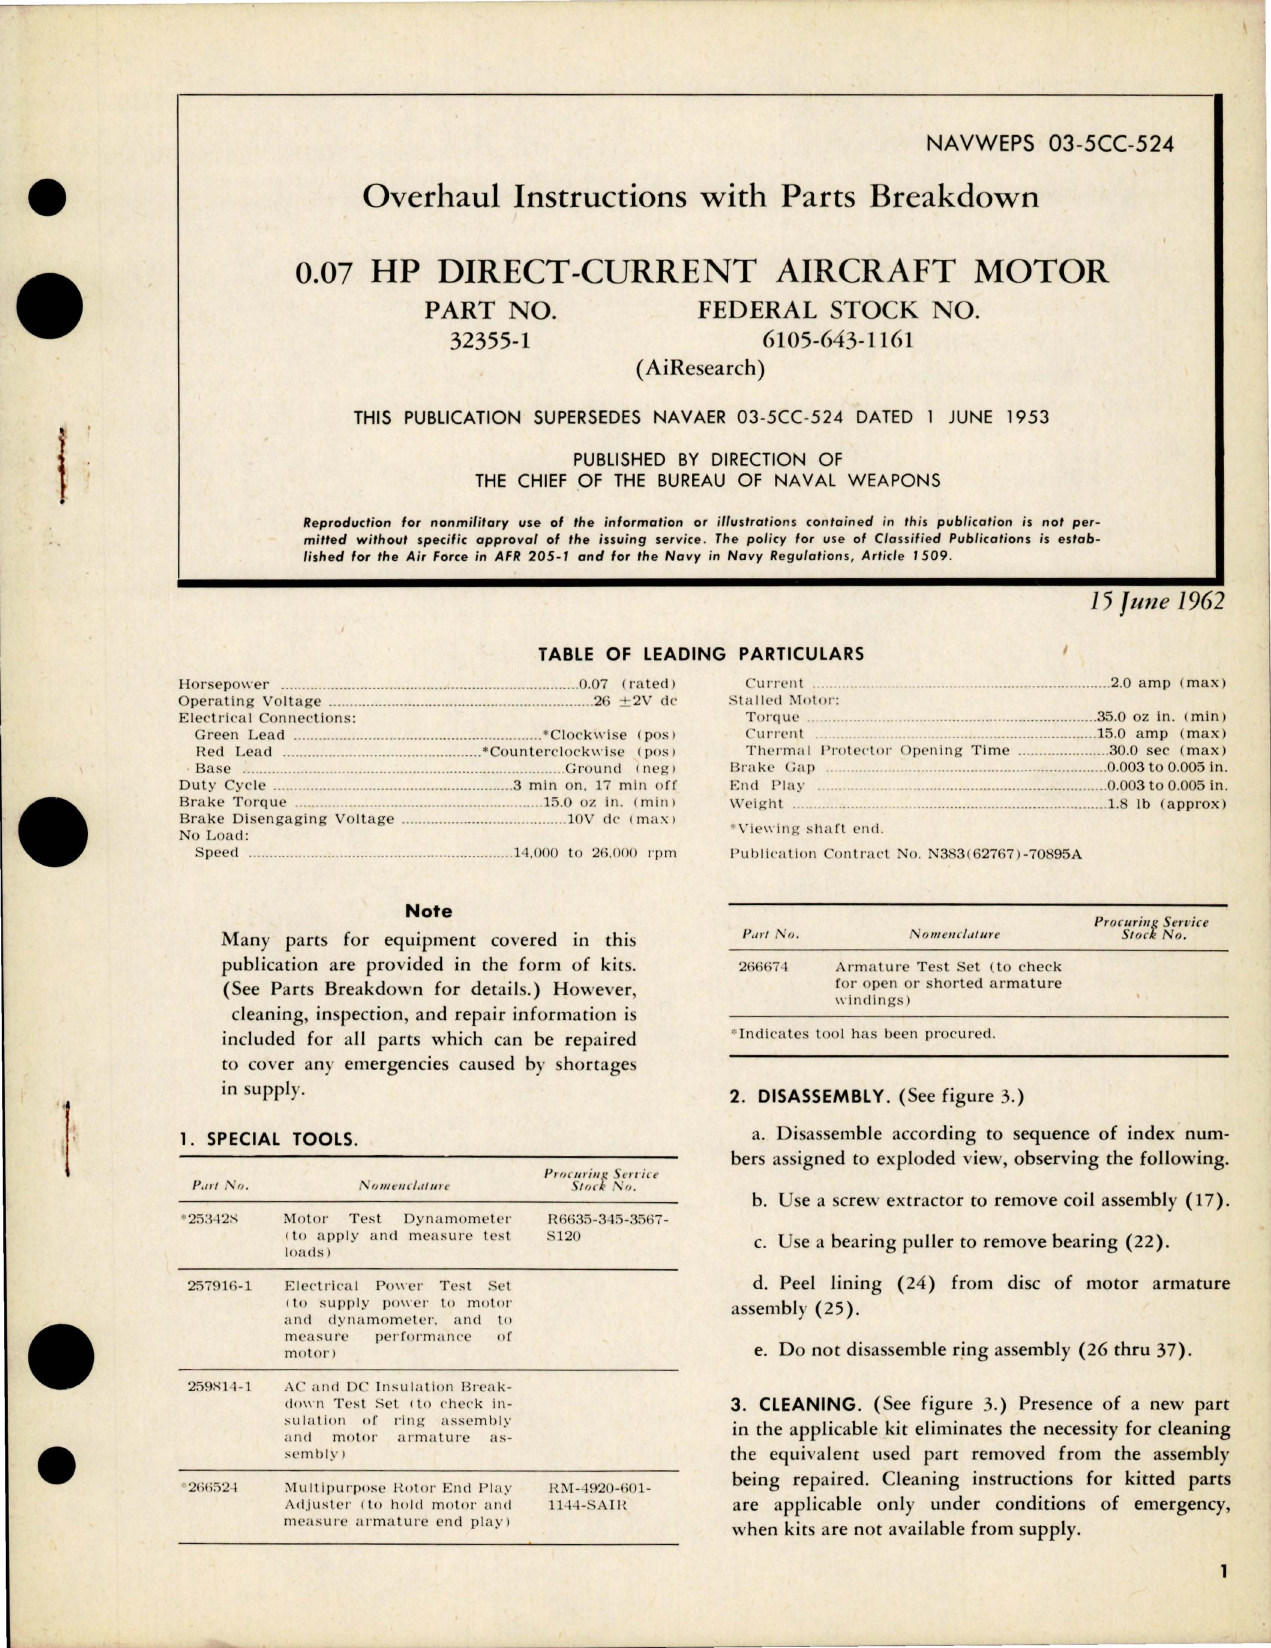 Sample page 1 from AirCorps Library document: Overhaul Instructions with Parts Breakdown for  Direct Current Aircraft Motor - 0.07 HP - Part 32355-1 